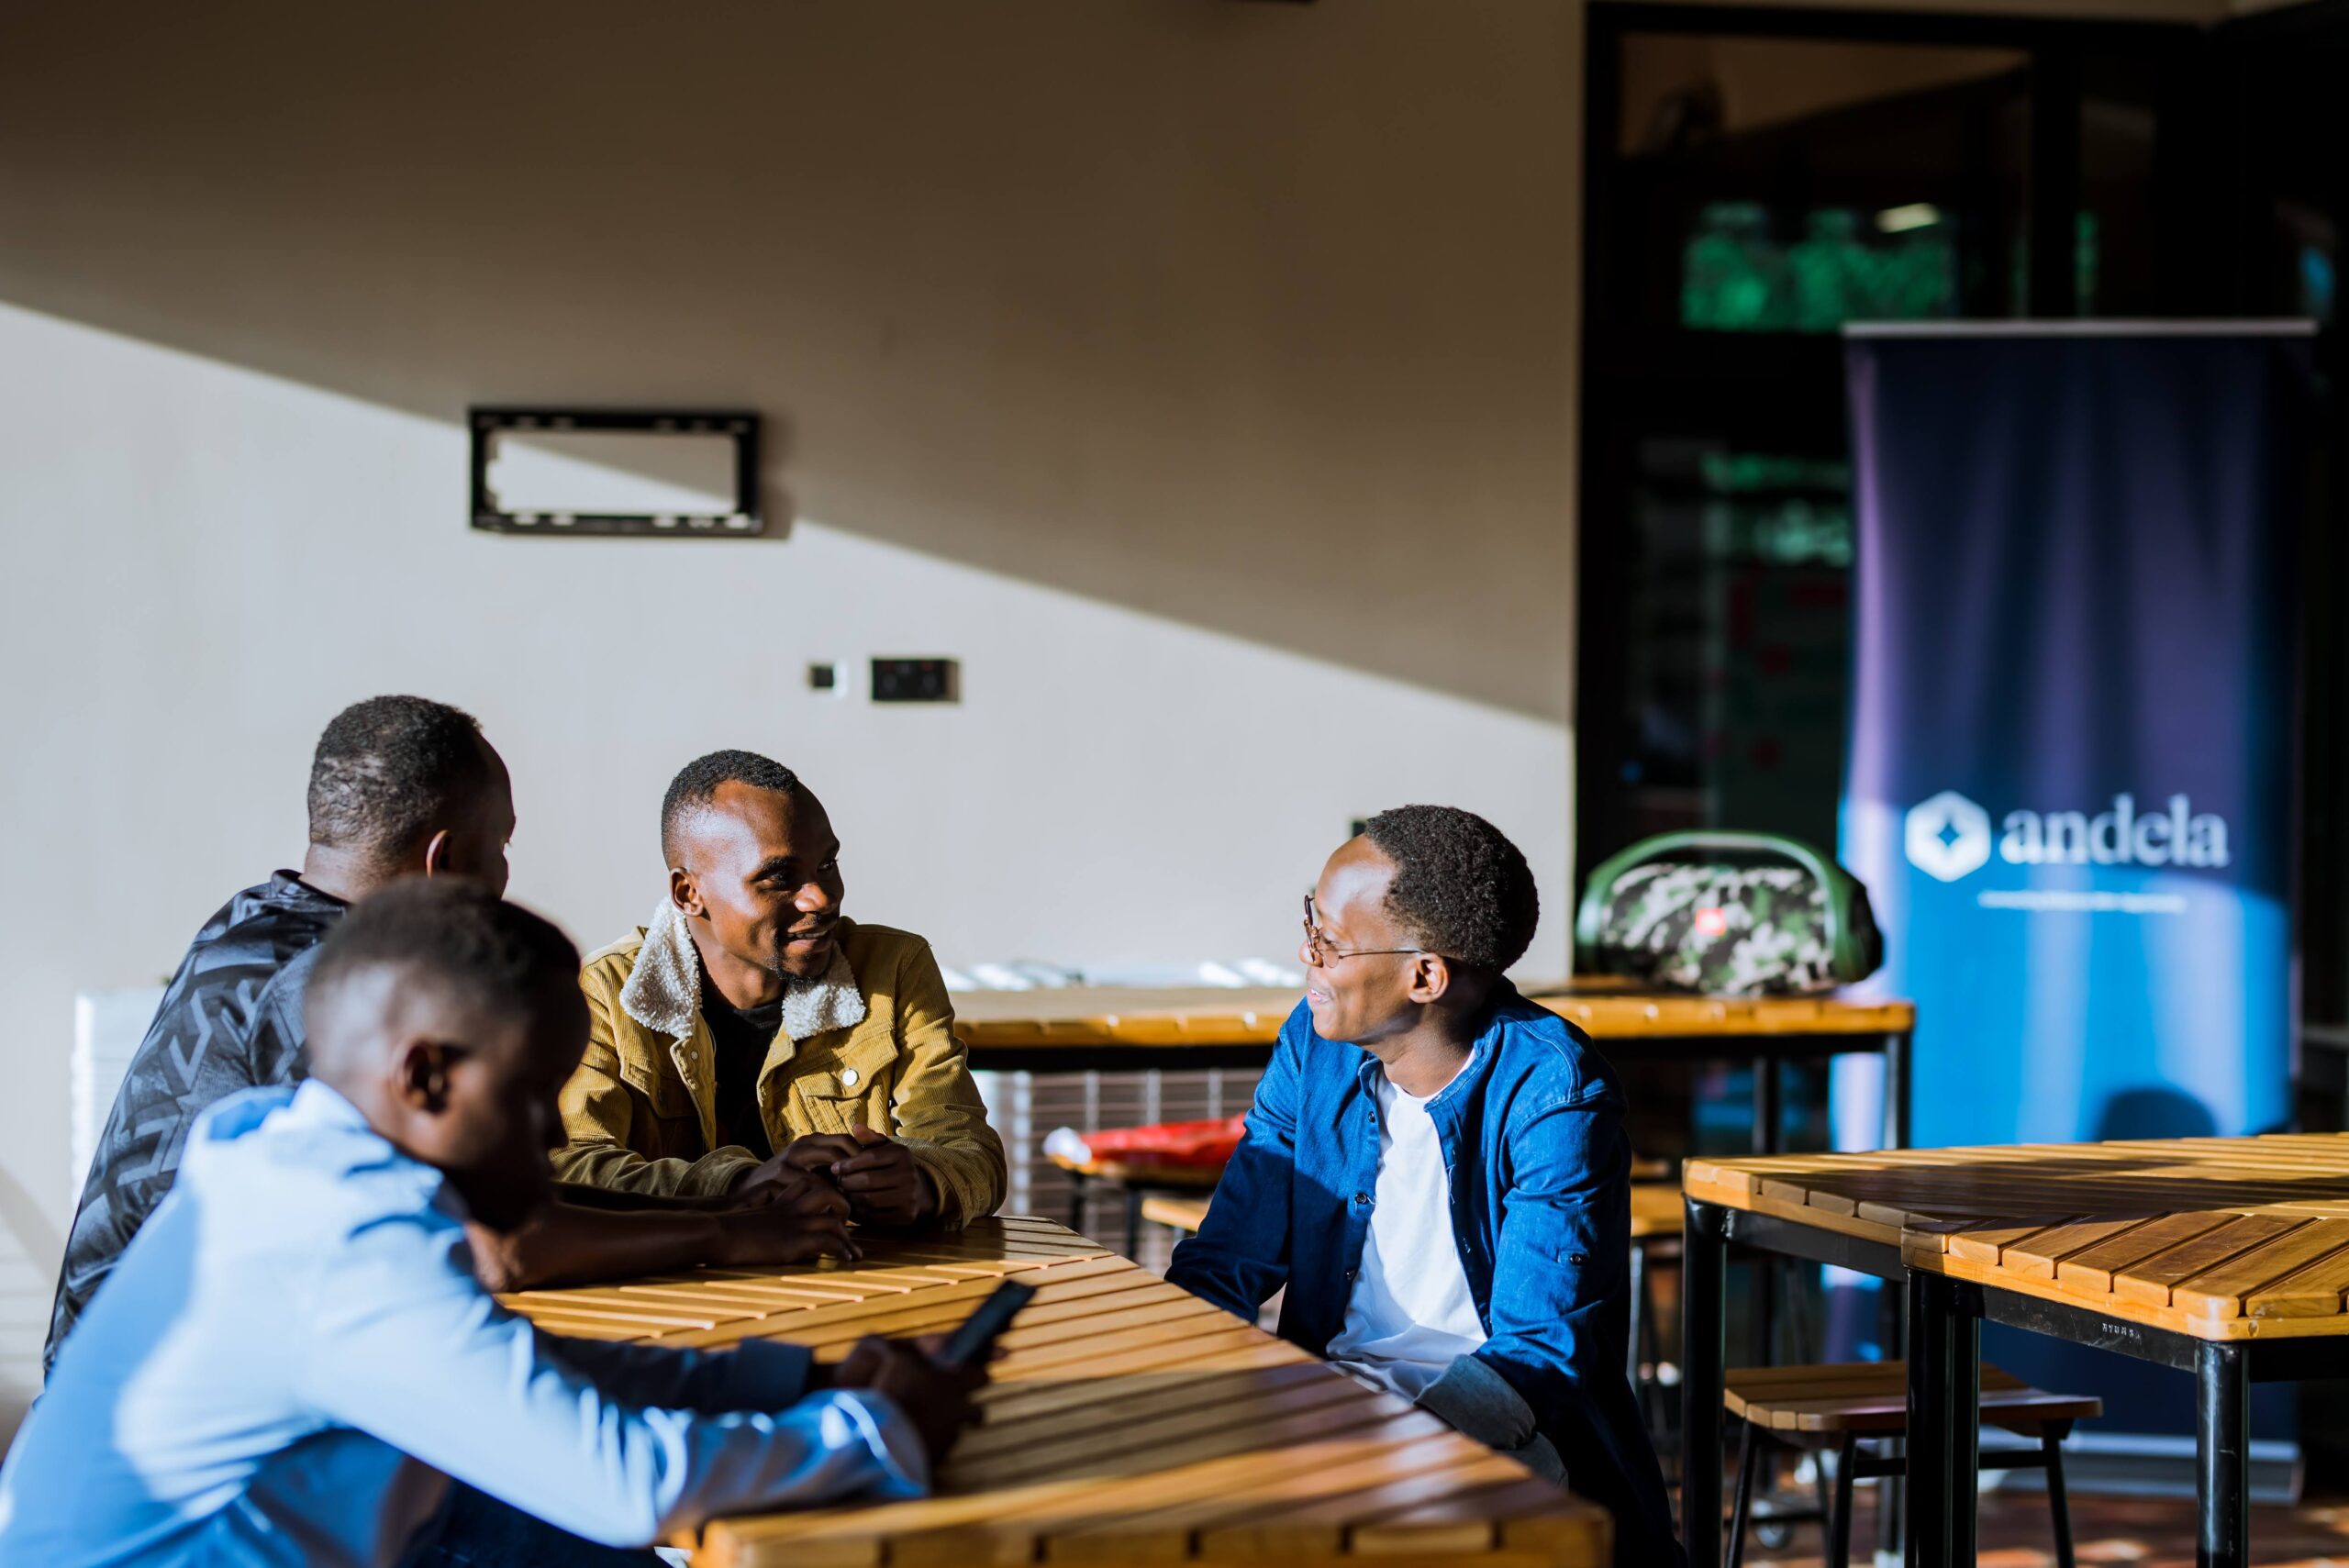 Andela Rwanda Launches Apprenticeship Program to Connect Africa’s Top Organizations with Talent